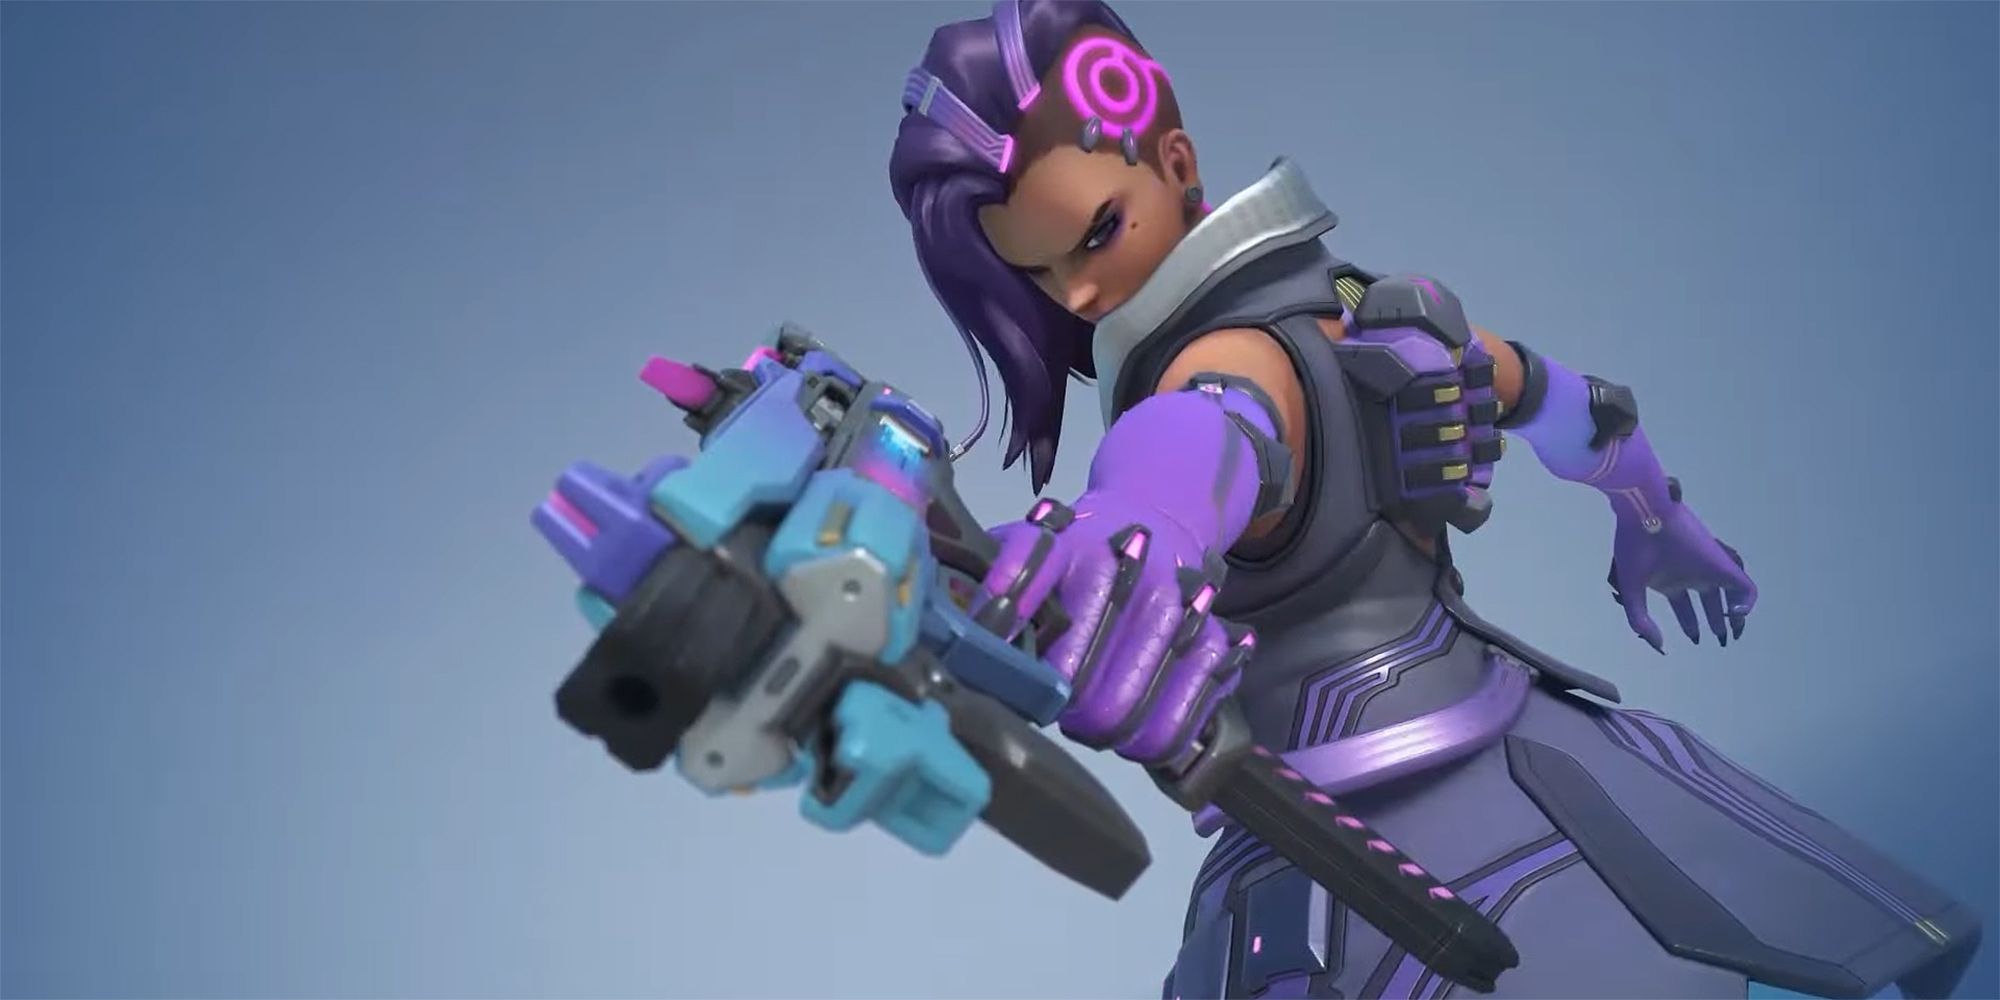 sombra aiming her gun in highlight intro